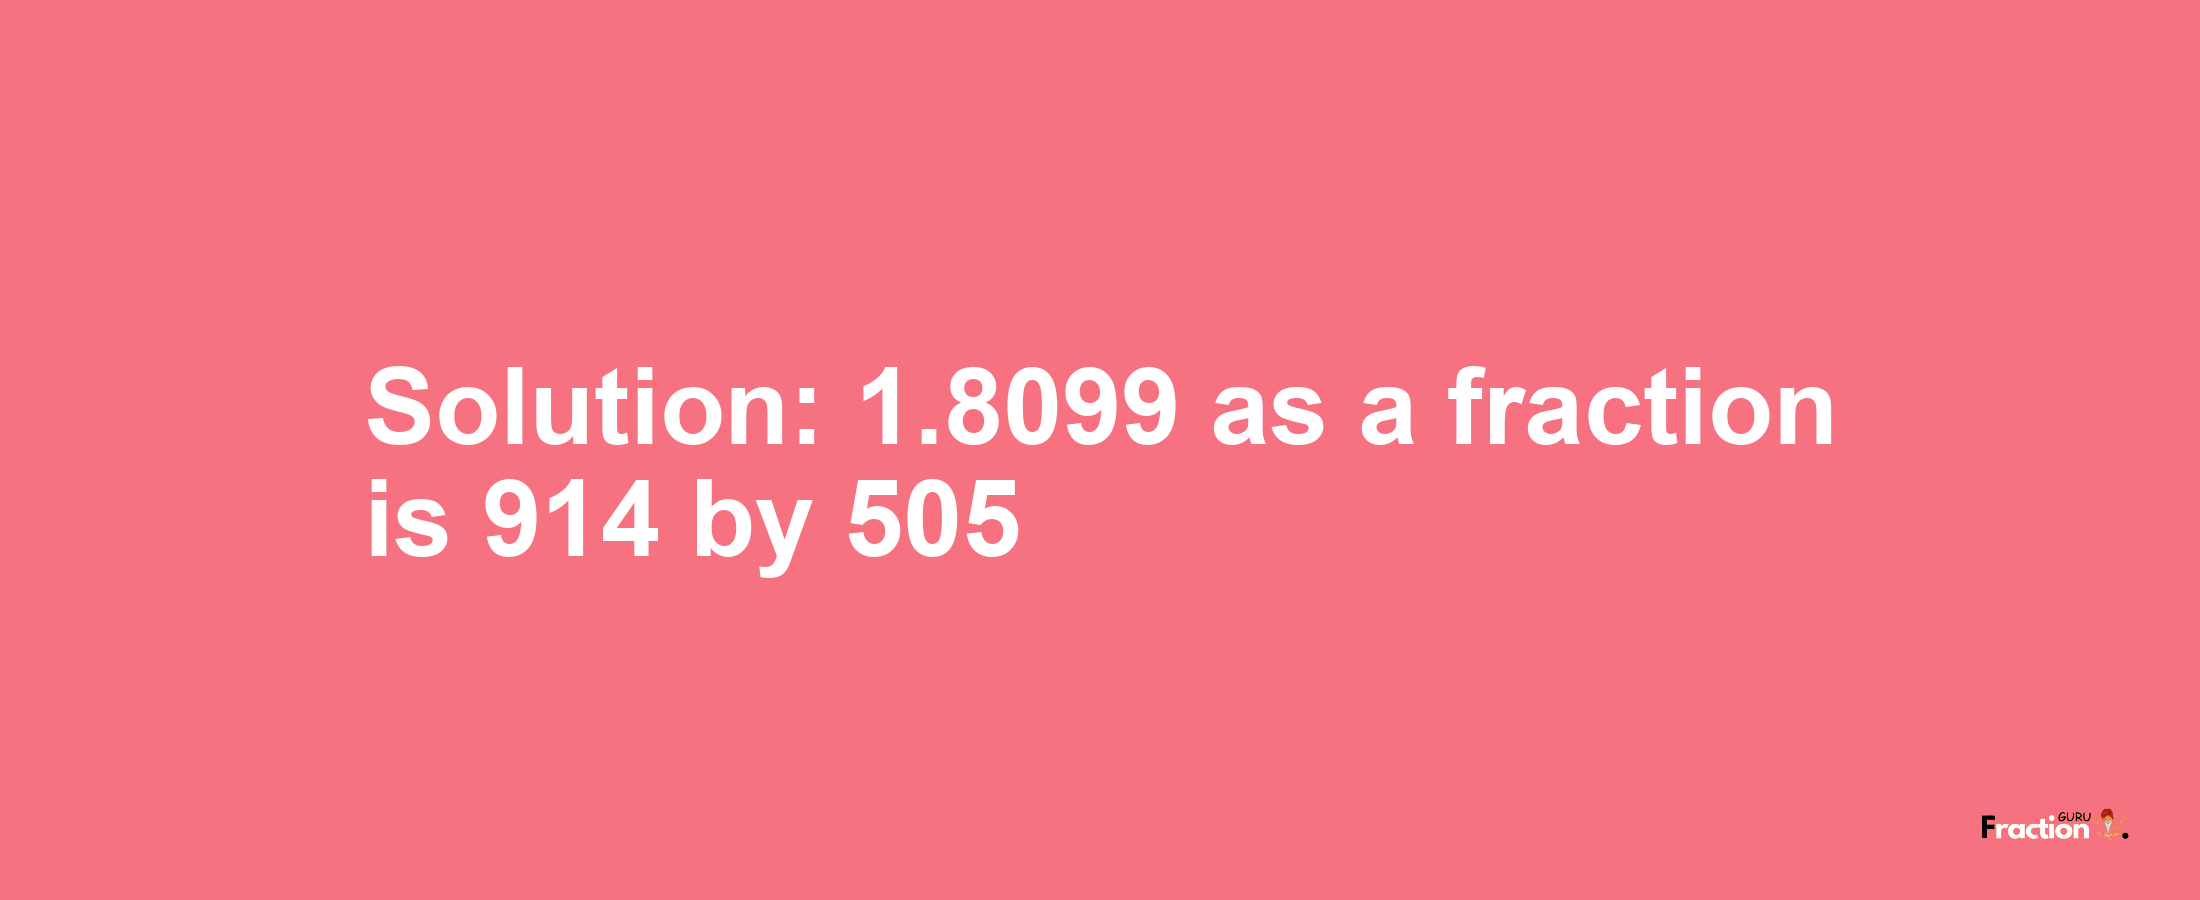 Solution:1.8099 as a fraction is 914/505